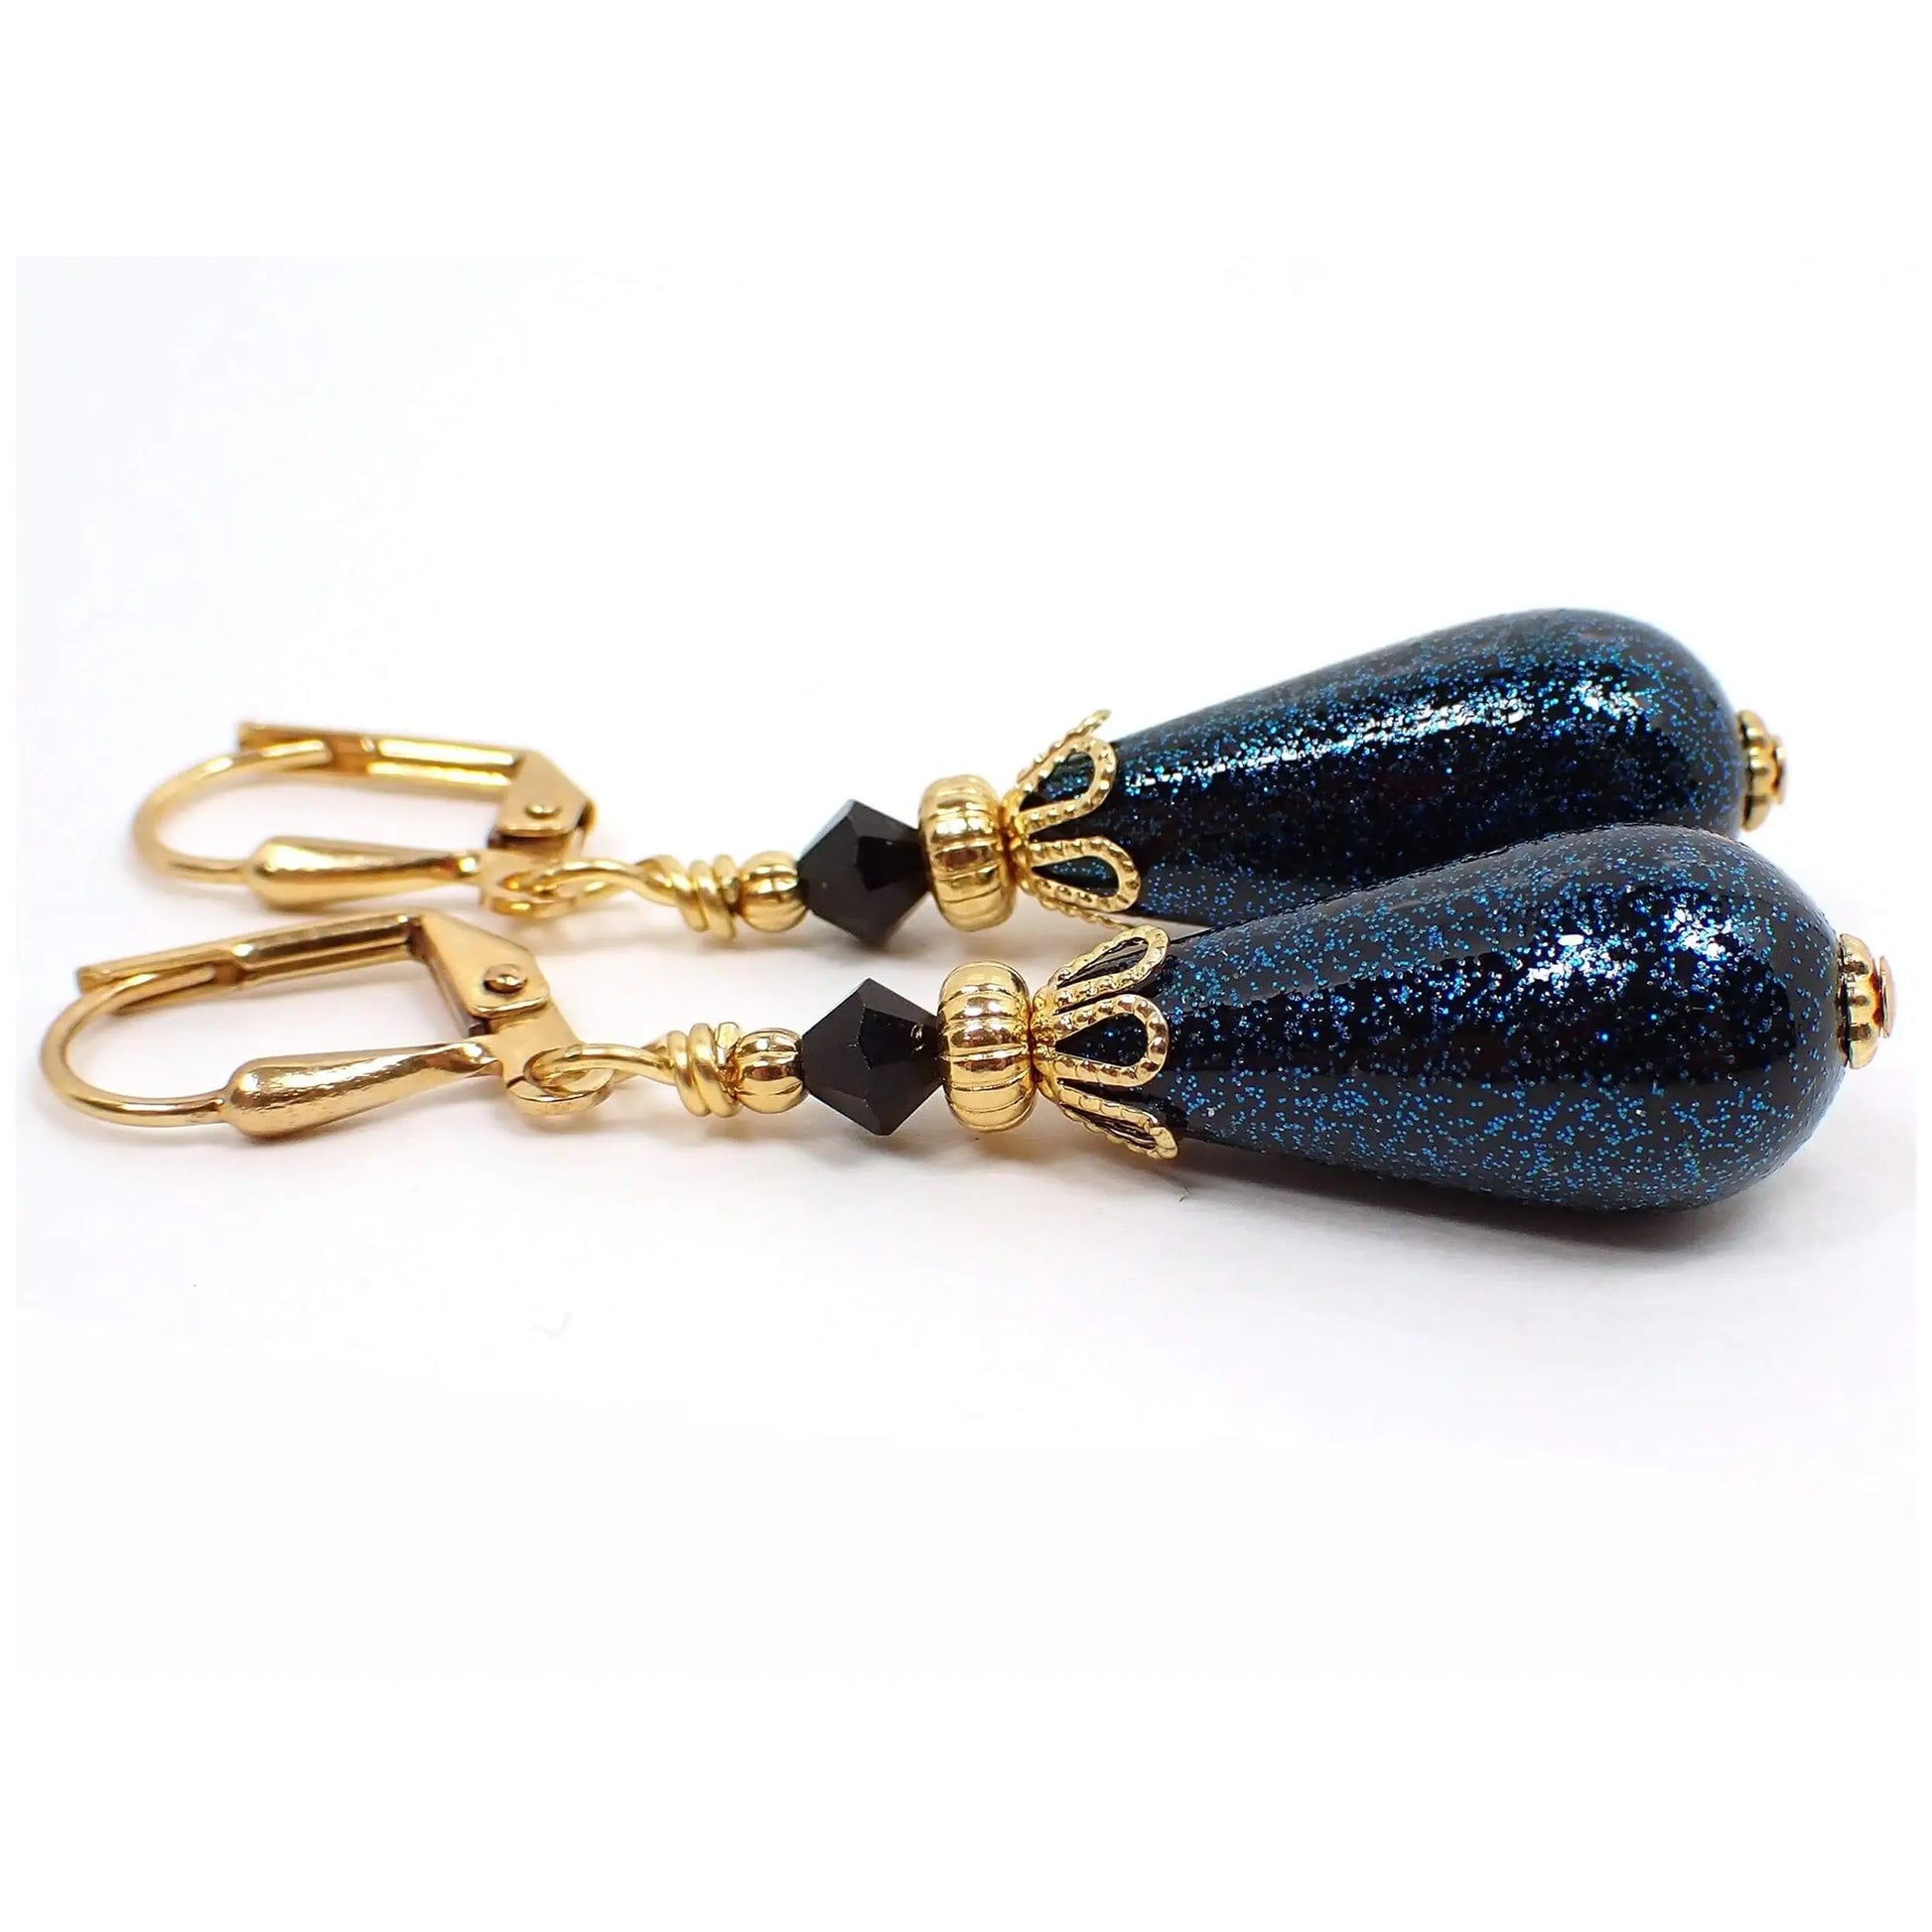 Side view of the handmade teardrop earrings with vintage German acrylic beads. The metal is gold plated in color. There are faceted black glass crystals at the top. The bottom acrylic beads are teardrop shaped and are black with tiny flecks of teal blue glitter embedded in them for sparkle all the way around.